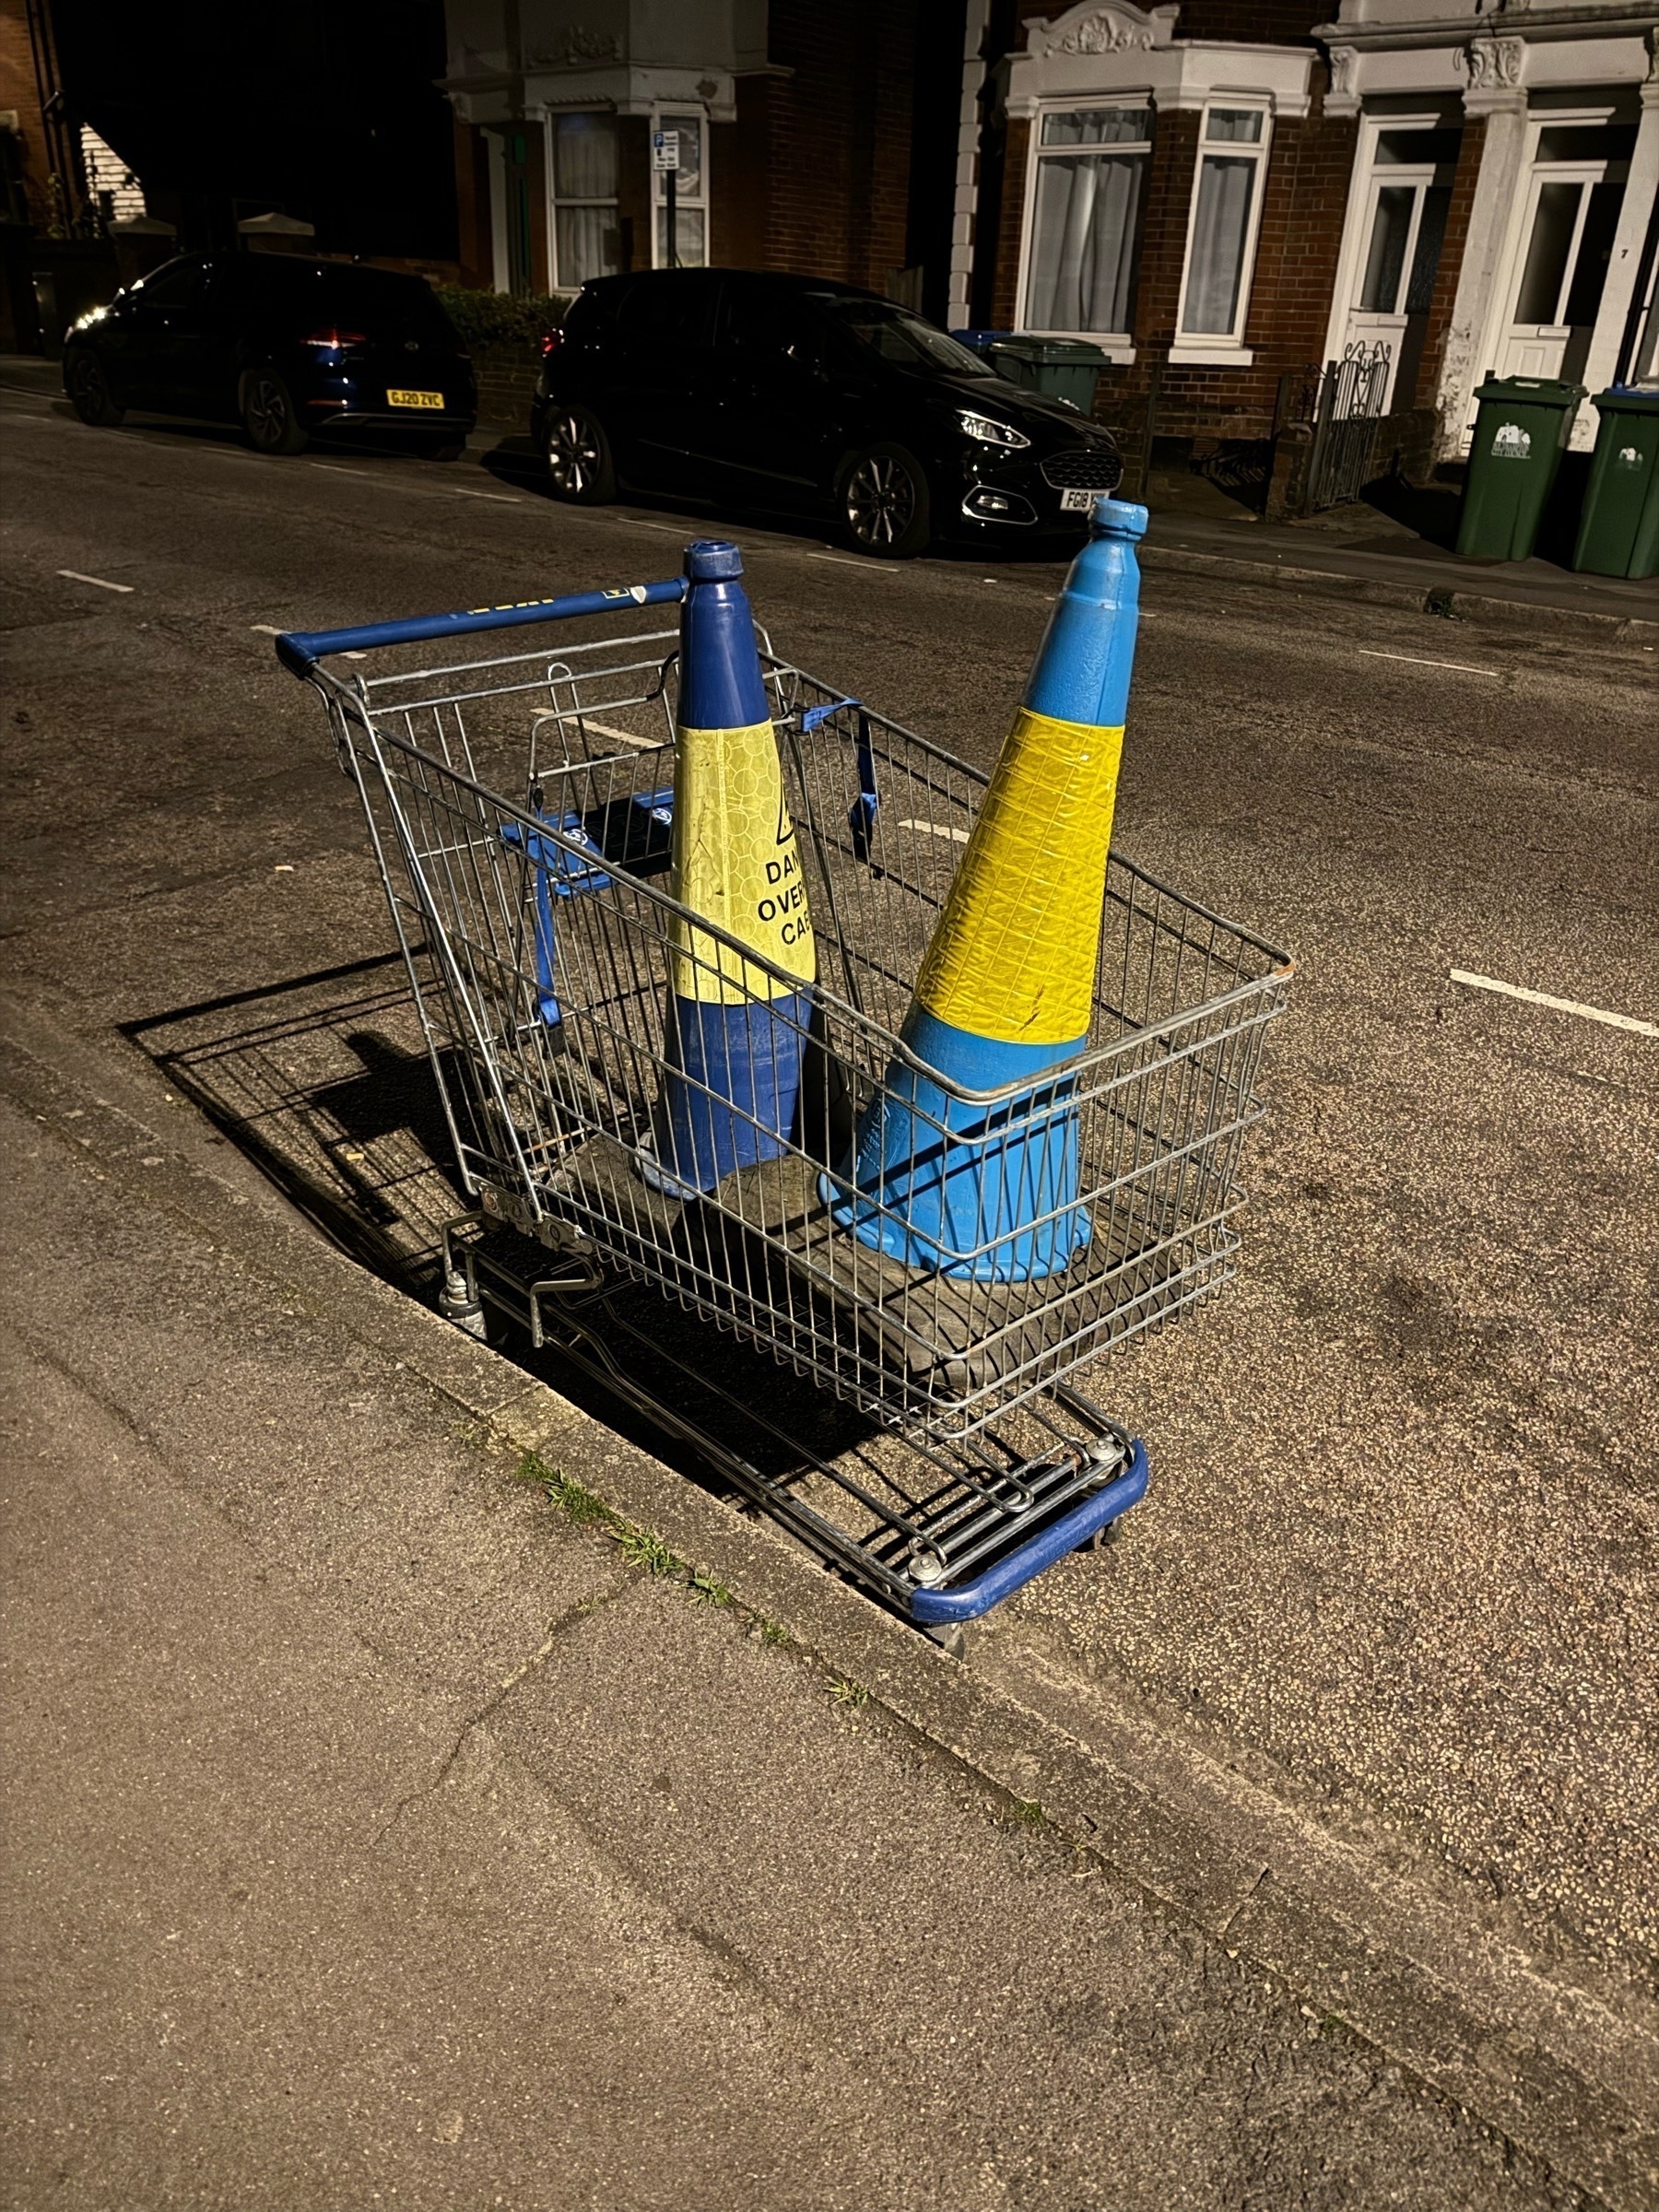 Supermarket trolley in the side of the road abandoned with two blue cones in the trolley with text warning about overhead cables likely dumped by local students  